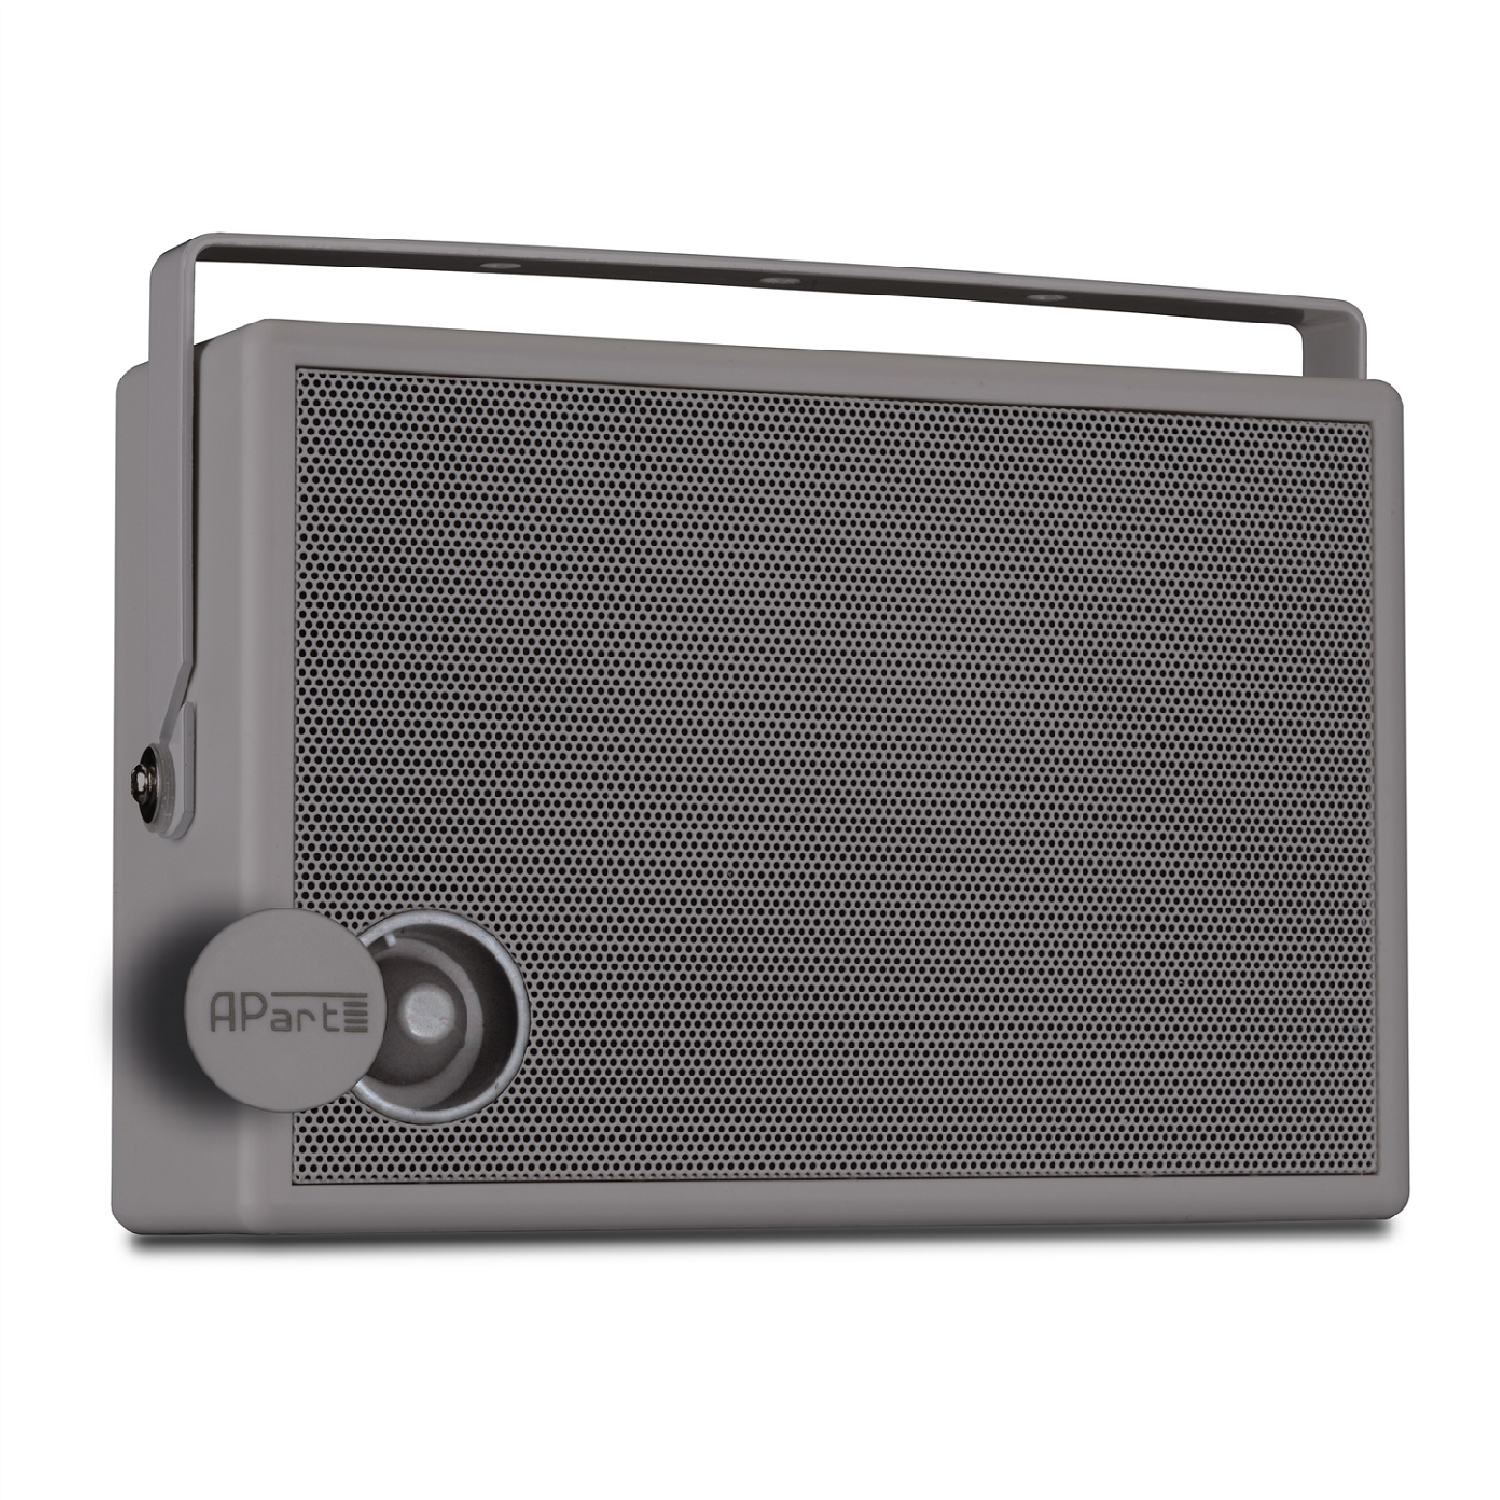 On-wall Speaker with Back Plate and U-bracket, Built-in Volume Control, 100 volt / 6 watts, SMB6V G , APART